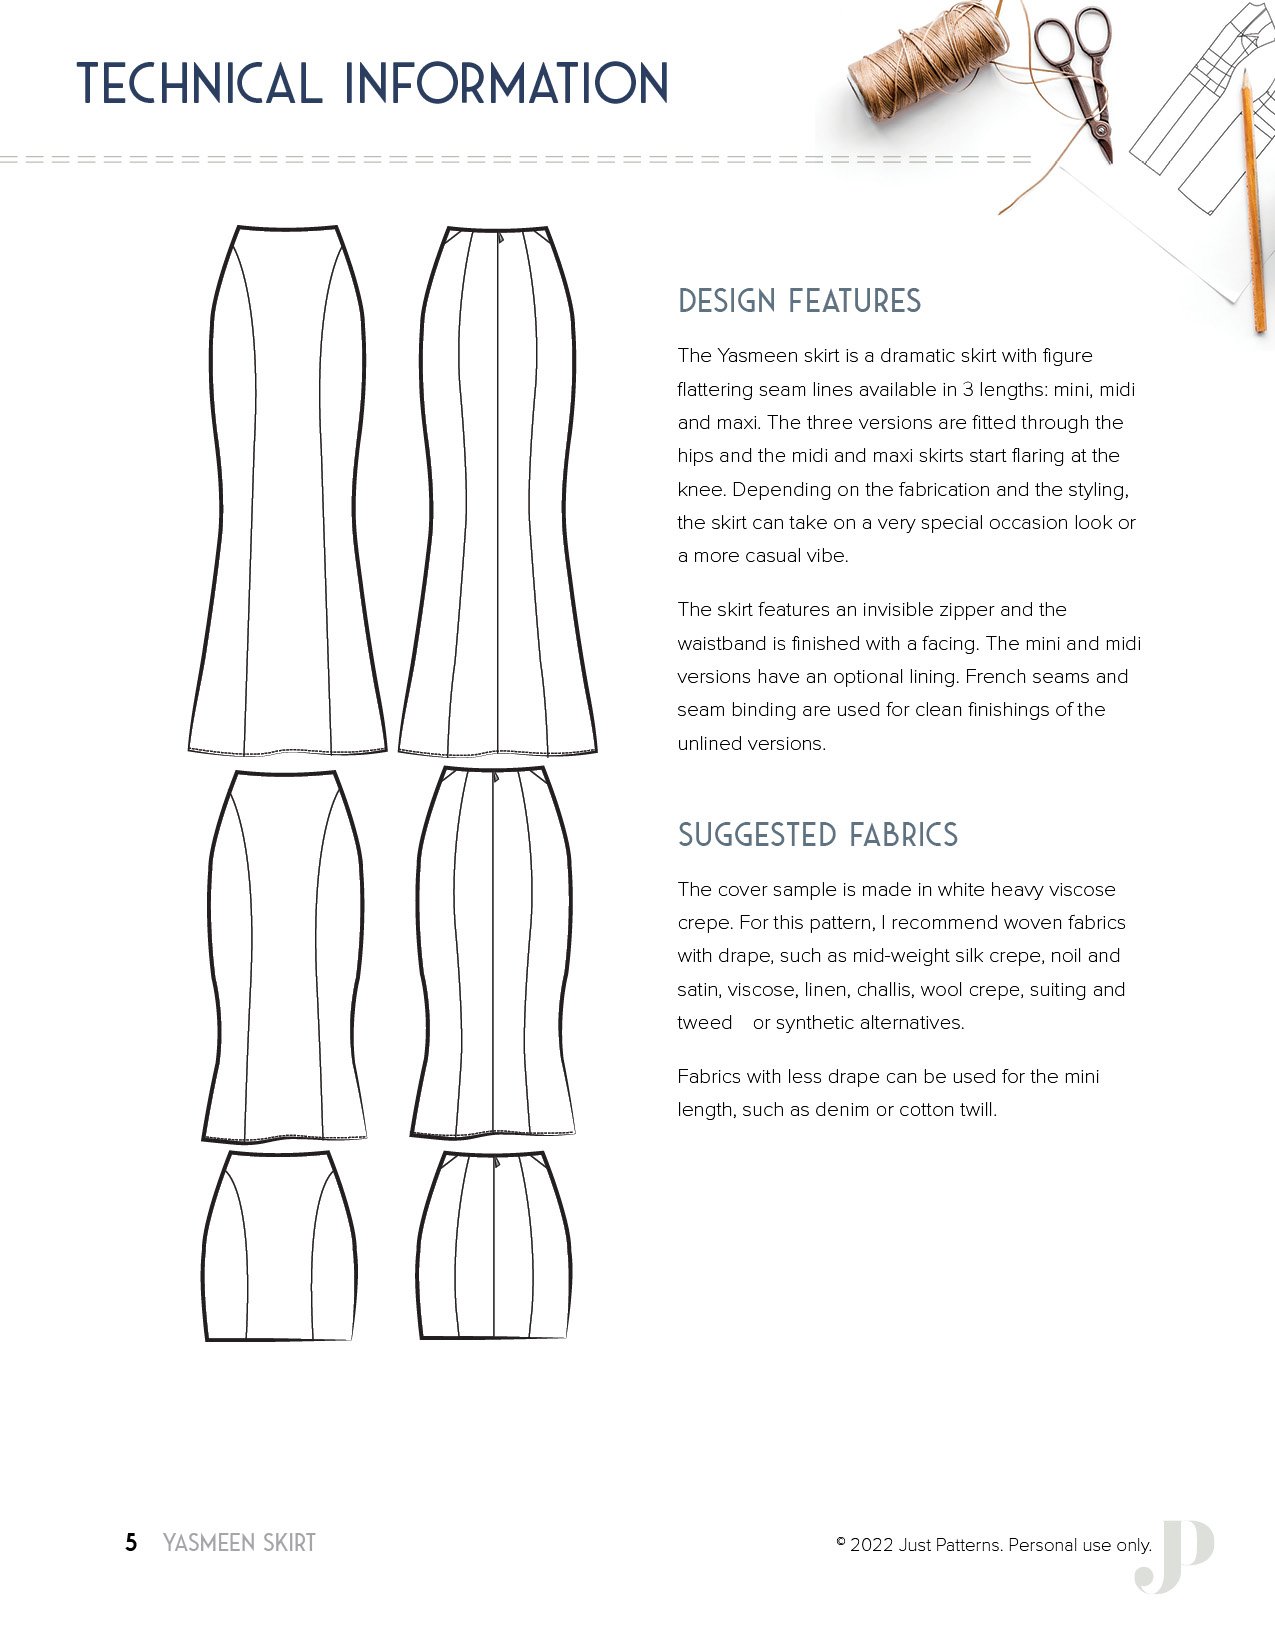 How To Make A Skirt Pattern: Draft A Skirt Block - The Creative Curator